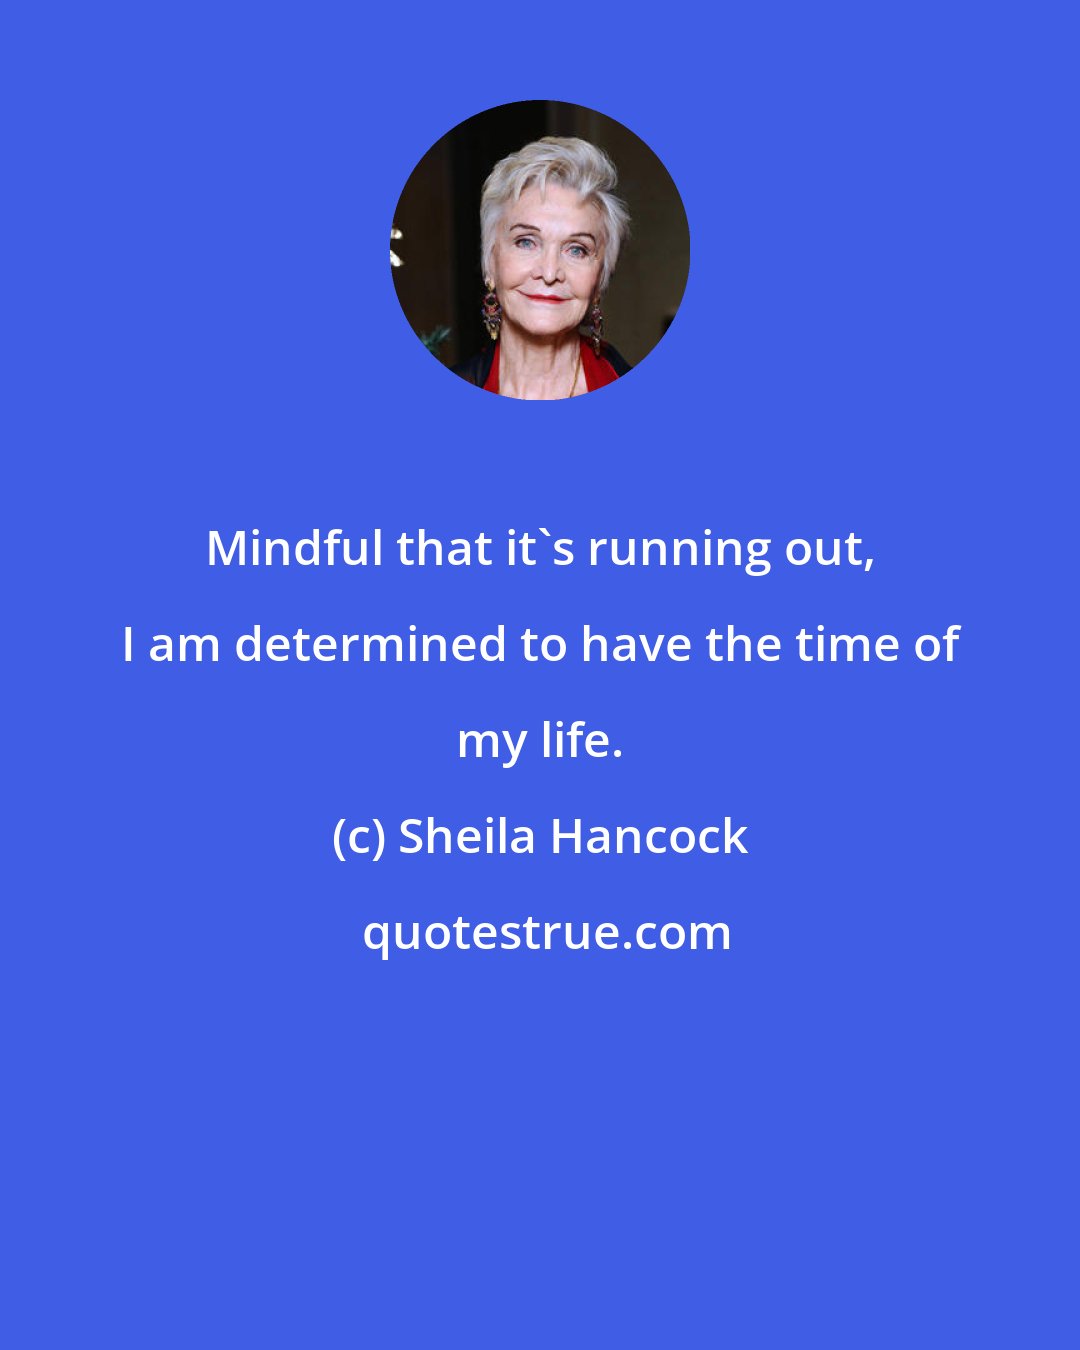 Sheila Hancock: Mindful that it's running out, I am determined to have the time of my life.